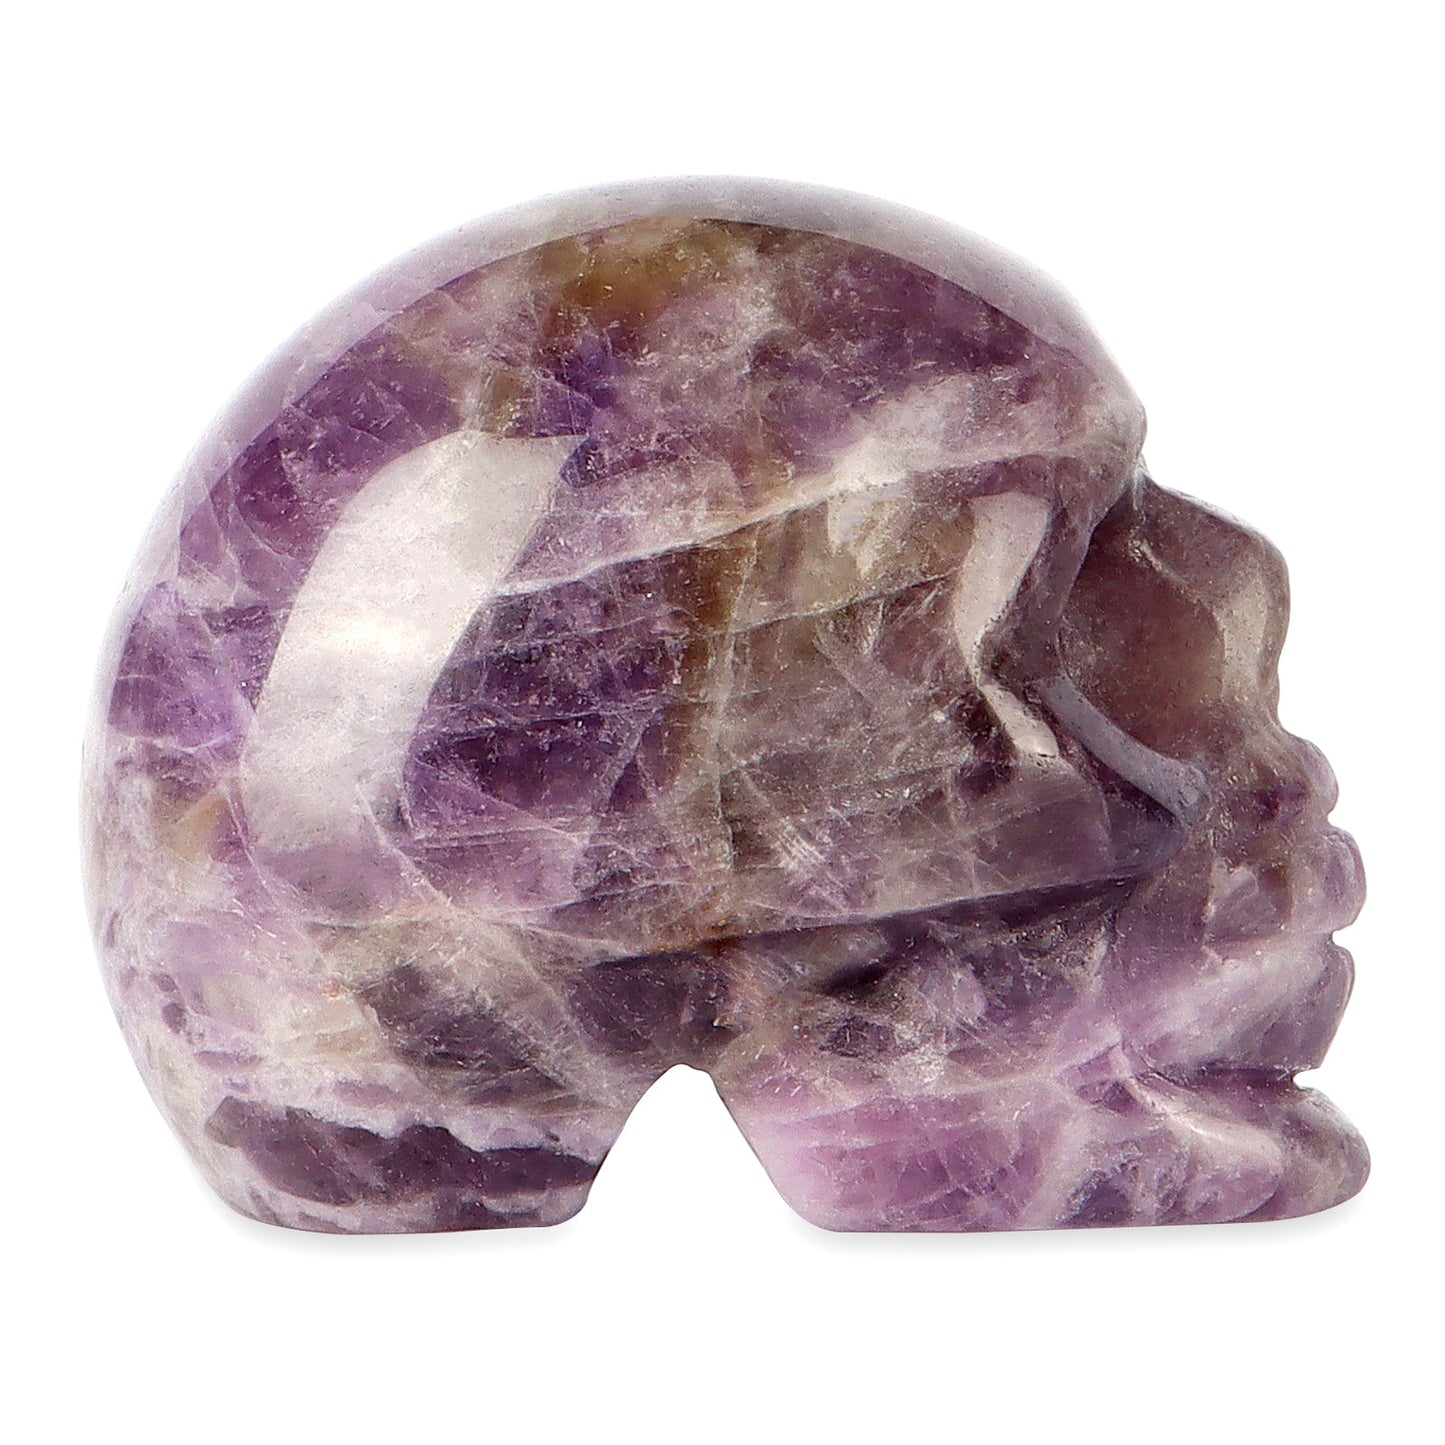 2.0" Amethyst Crystal Skull Head Statue Crystals Healing Figurines Aoxily CHN, Inc. All Rights Reserved.